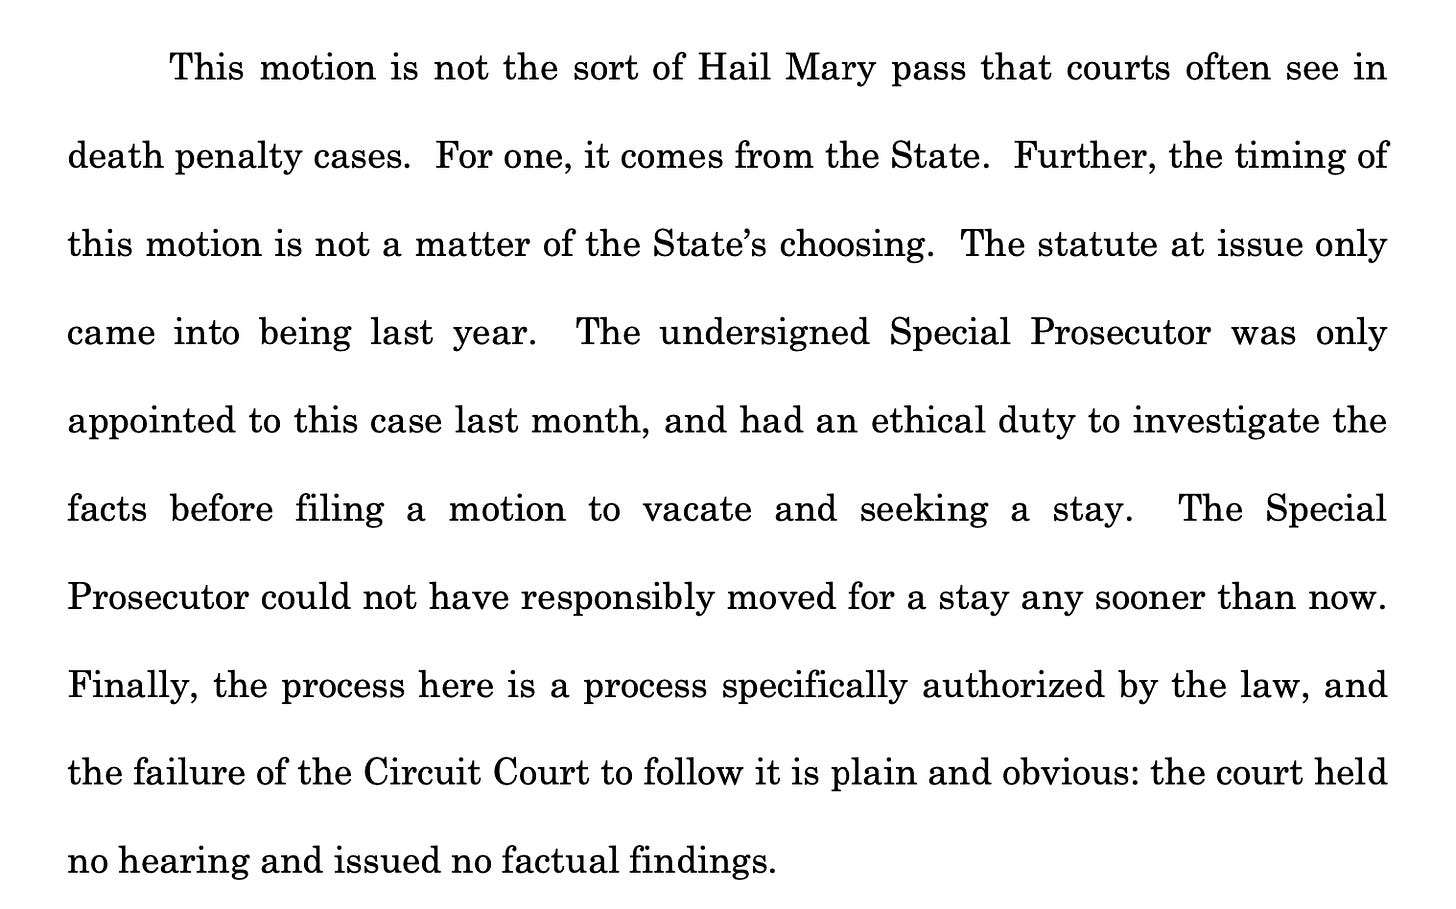 This motion is not the sort of Hail Mary pass that courts often see in death penalty cases. For one, it comes from the State. Further, the timing of this motion is not a matter of the State’s choosing. The statute at issue only came into being last year. The undersigned Special Prosecutor was only appointed to this case last month, and had an ethical duty to investigate the facts before filing a motion to vacate and seeking a stay. The Special Prosecutor could not have responsibly moved for a stay any sooner than now. Finally, the process here is a process specifically authorized by the law, and the failure of the Circuit Court to follow it is plain and obvious: the court held no hearing and issued no factual findings.